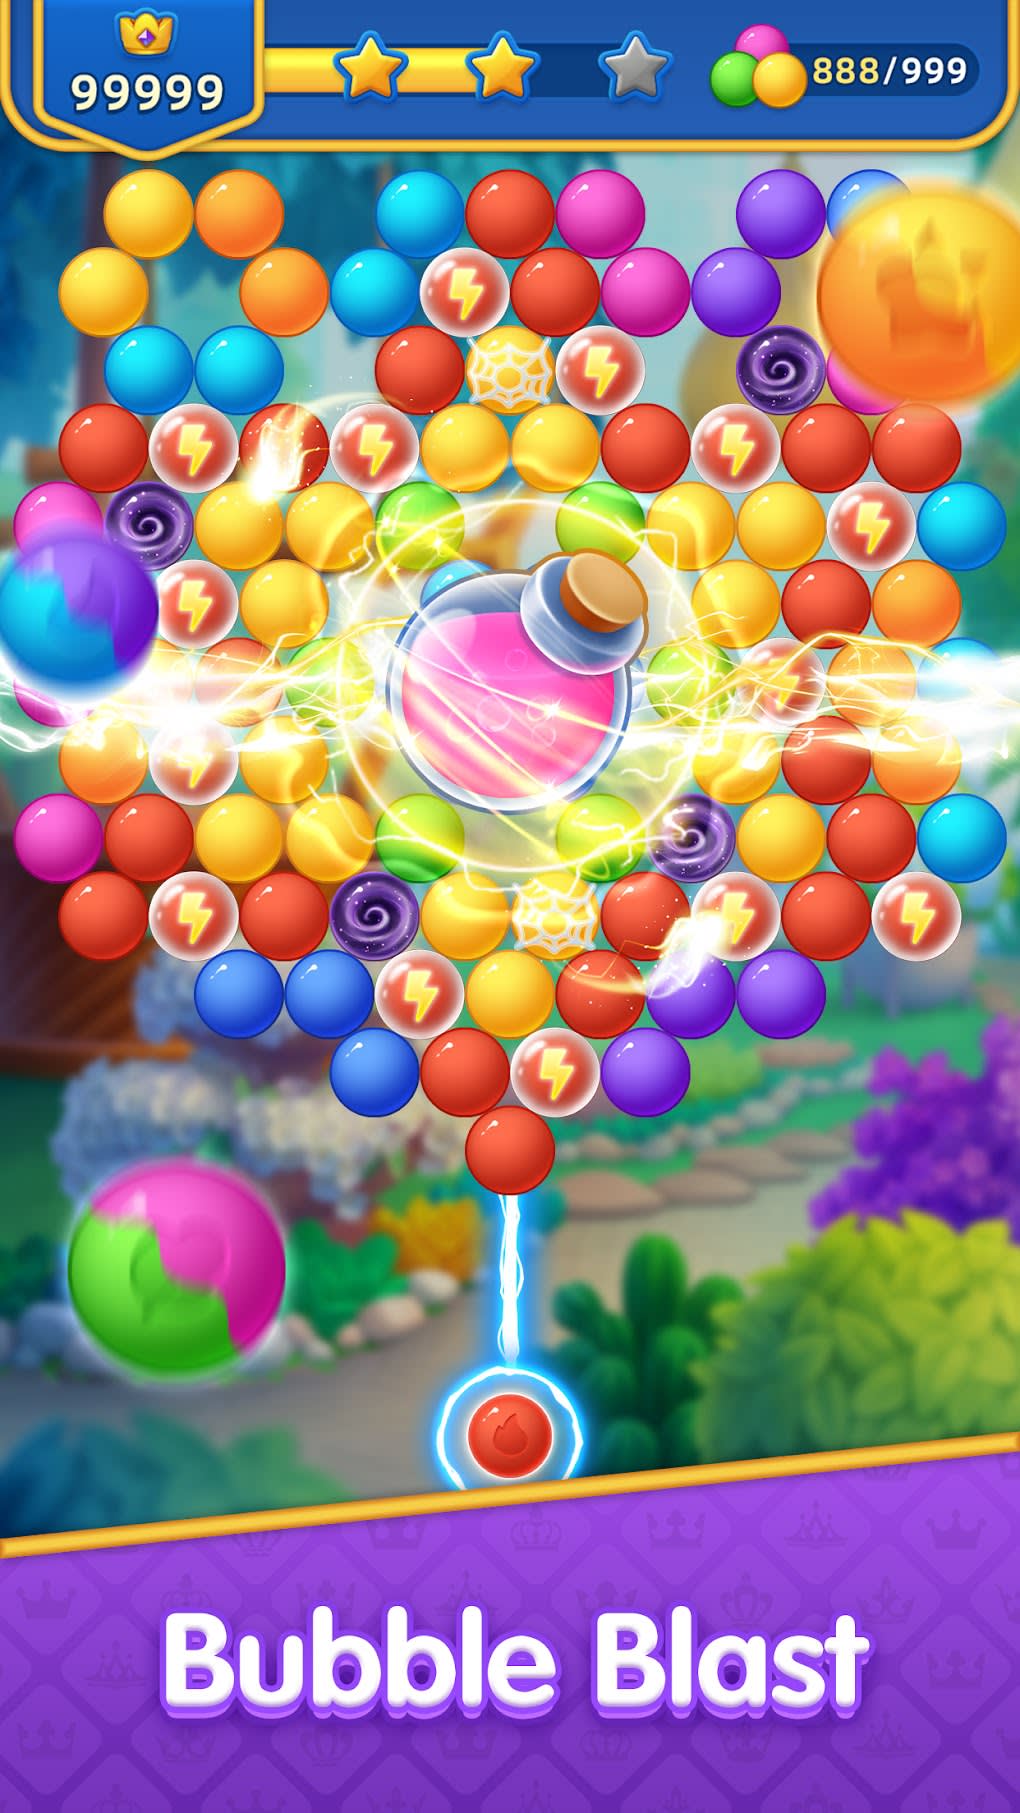 Bubble Shooter: Bubble Games for Android - Download